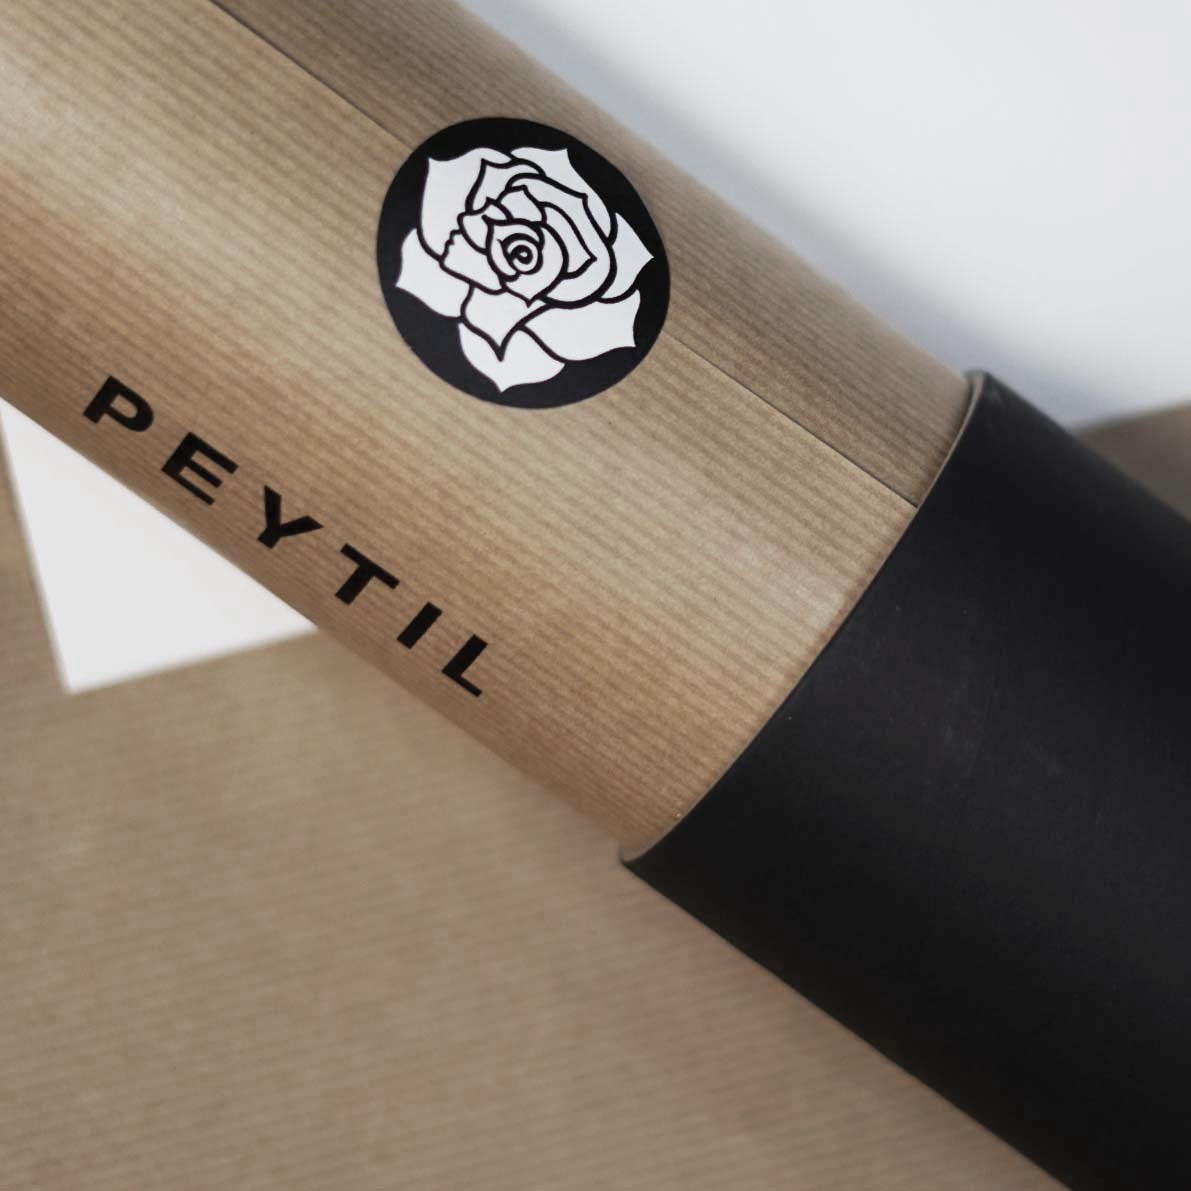 'Pemba' Limited Edition of 500 - Peytil